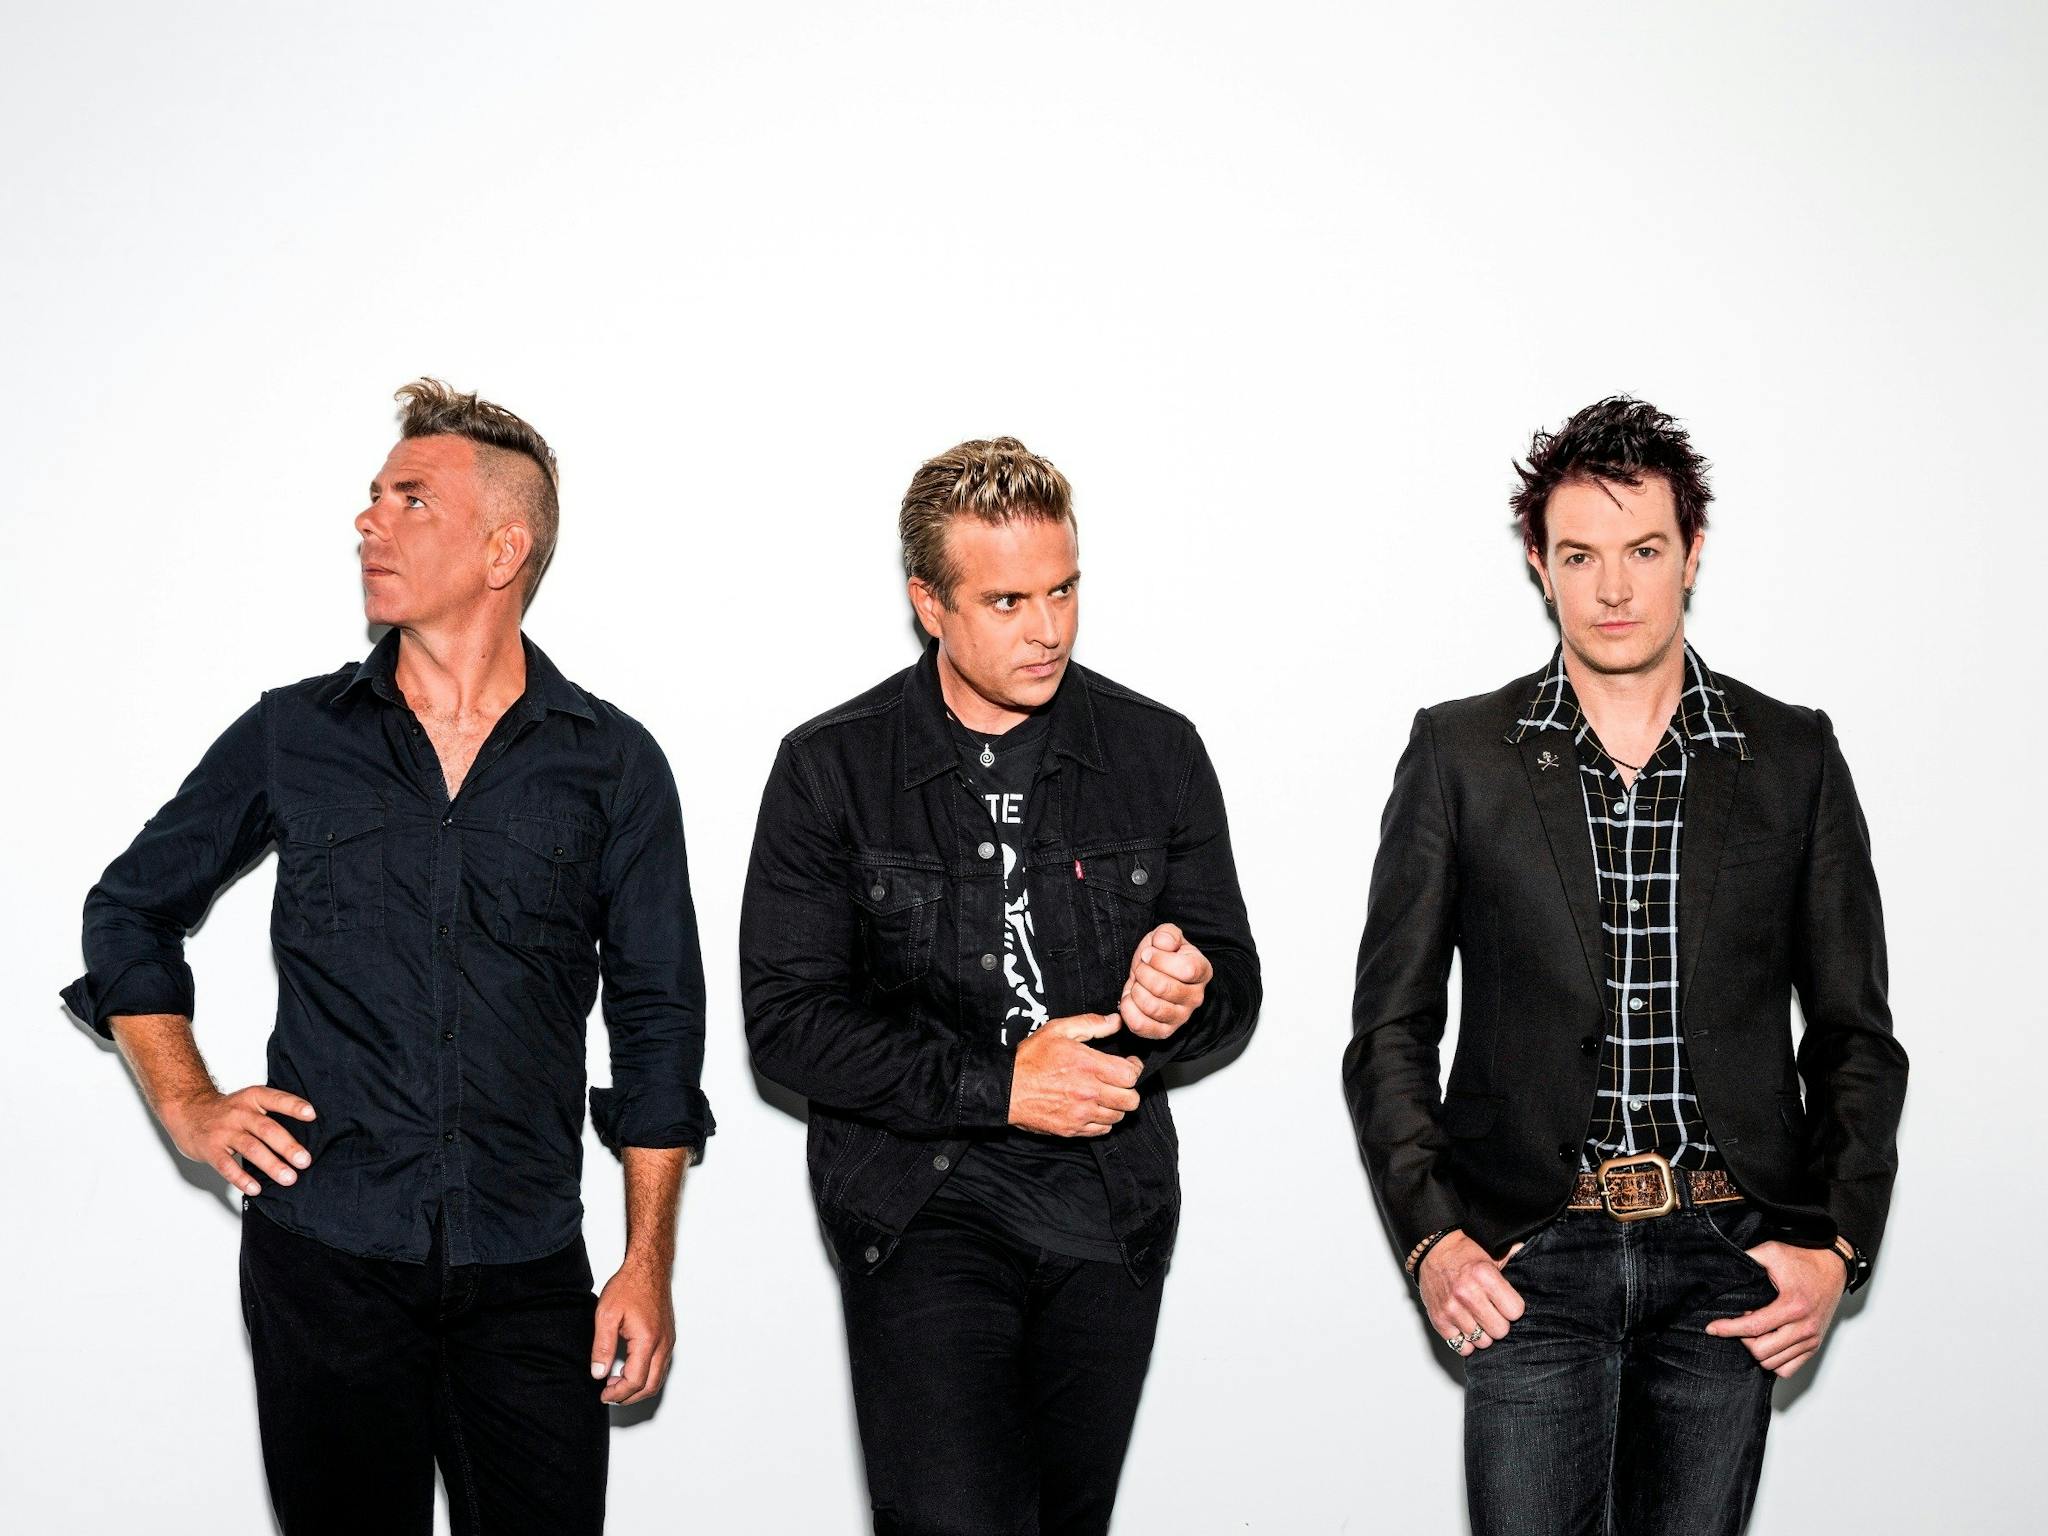 A photo of the band, The Living End